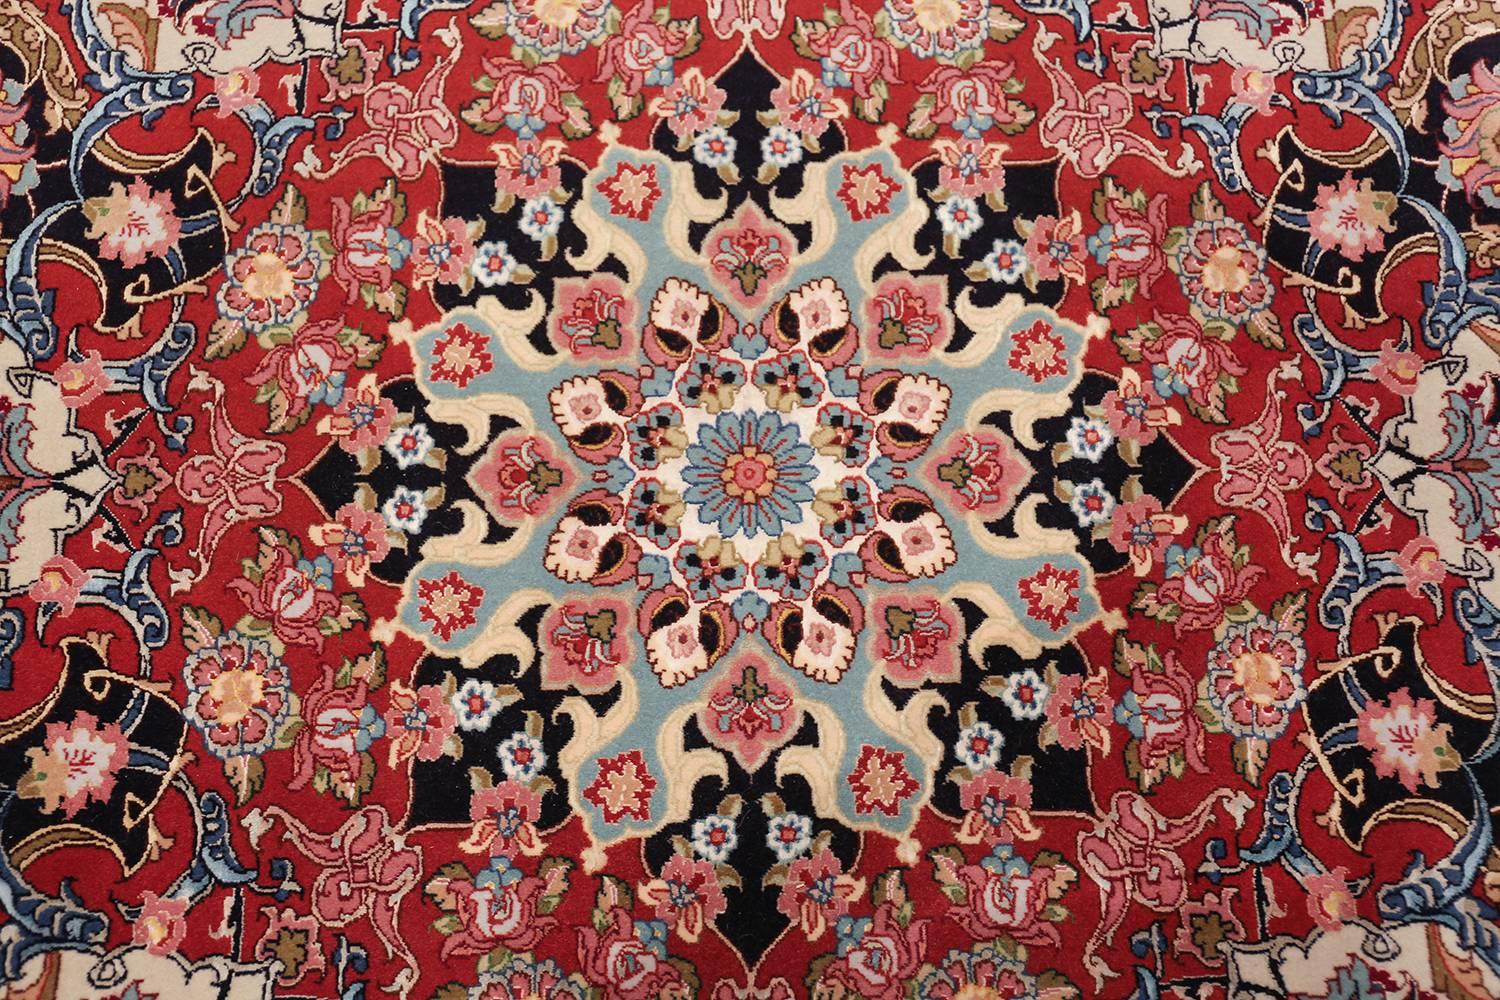 Magnificent large silk and wool vintage Tabriz Persian rug, country of origin / rug type: vintage Persian rug, date: circa late 20th century. Size: 11 ft 7 in x 16 ft 10 in (3.53 m x 5.13 m)

